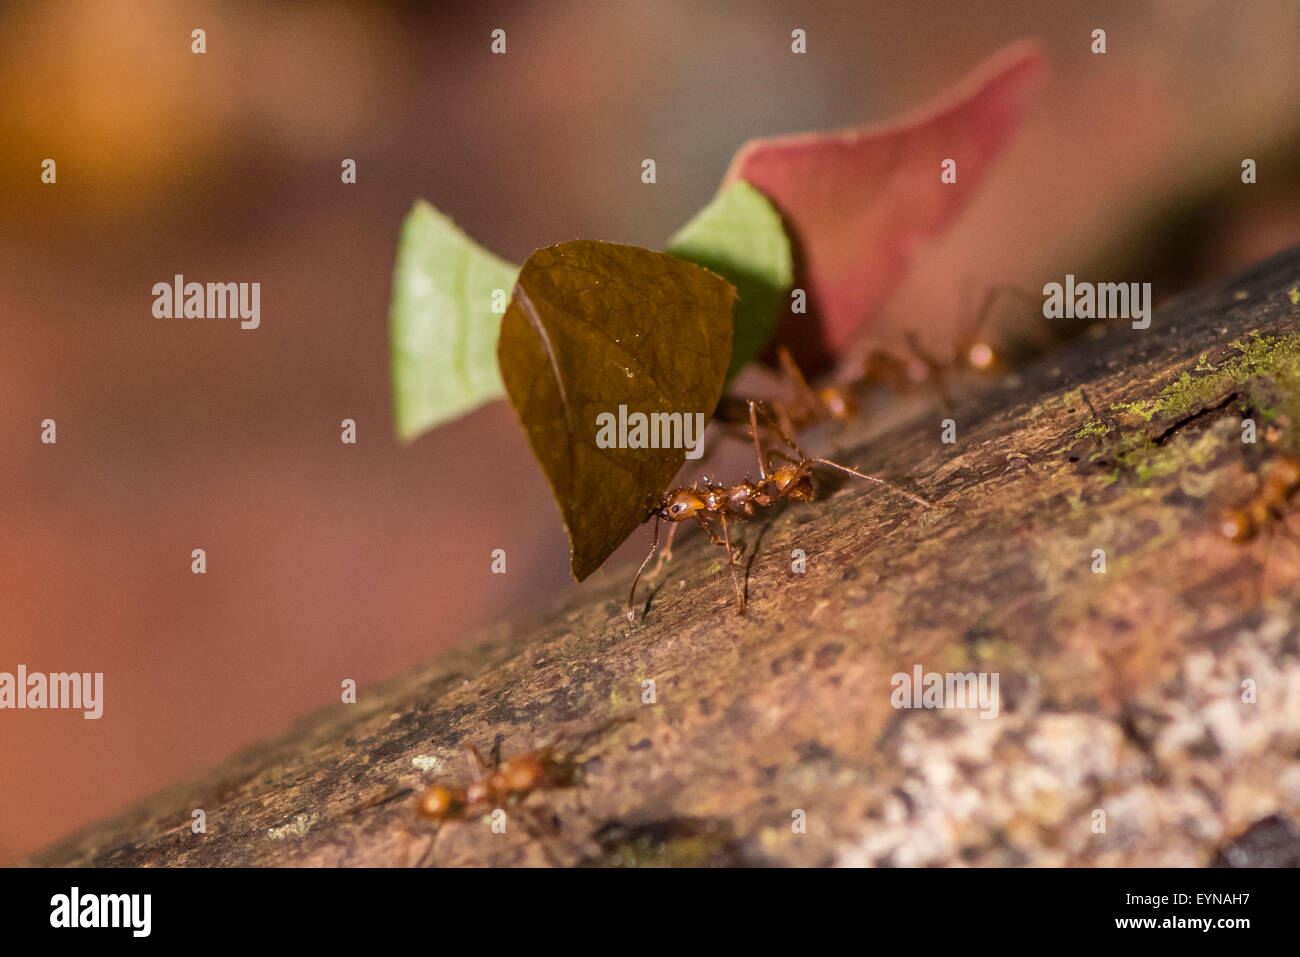 A Leaf-cutter ant returning to its nest after foraging Stock Photo